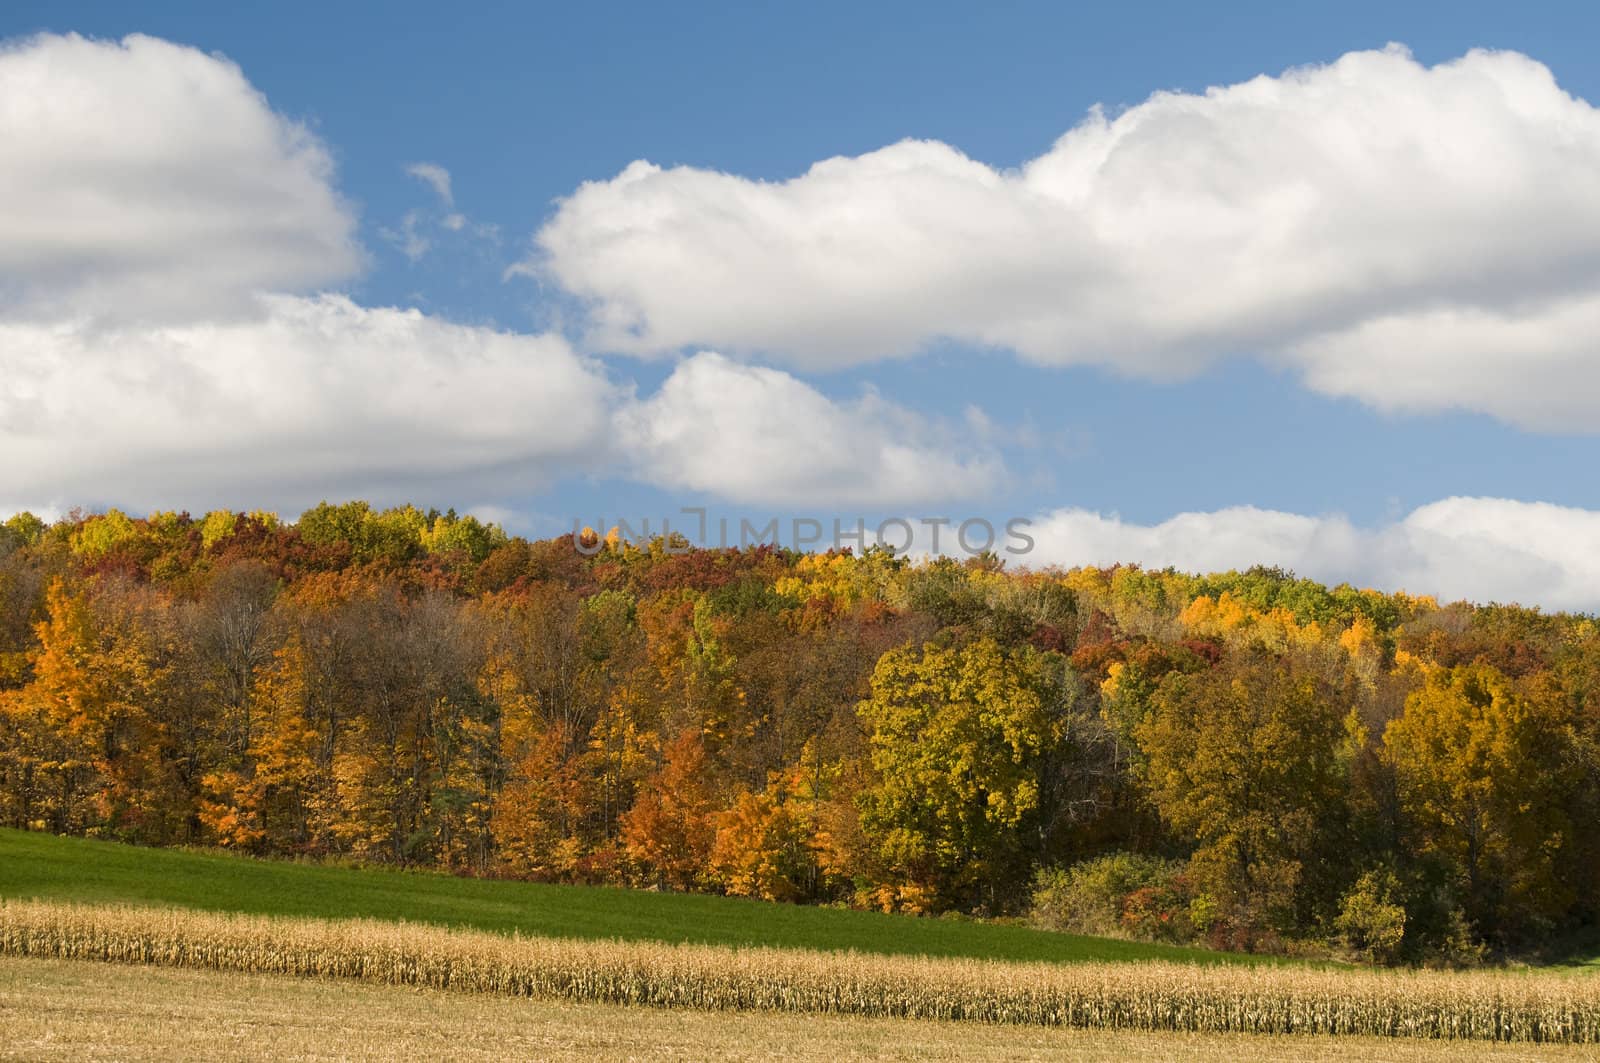 Farm field in autumn with a stand of maple trees on the horizon